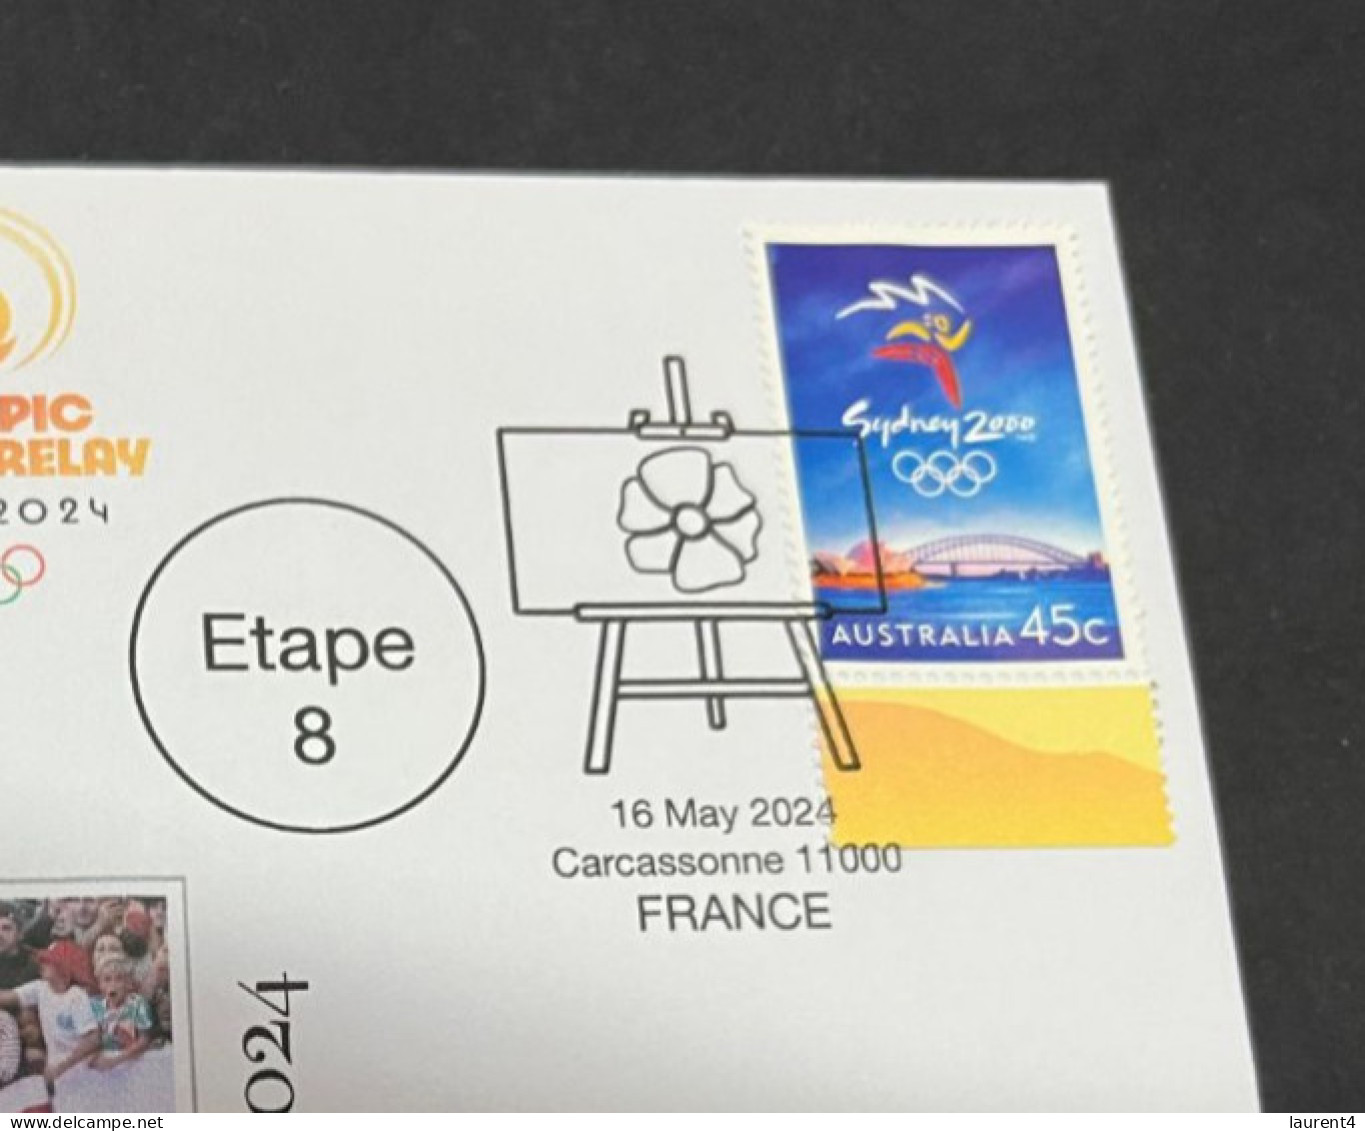 17-5-2024 (5 Z 17) Paris Olympic Games 2024 - Torch Relay (Etape 8) In Carcassonne (16-5-2024) With OLYMPIC Stamp - Zomer 2024: Parijs